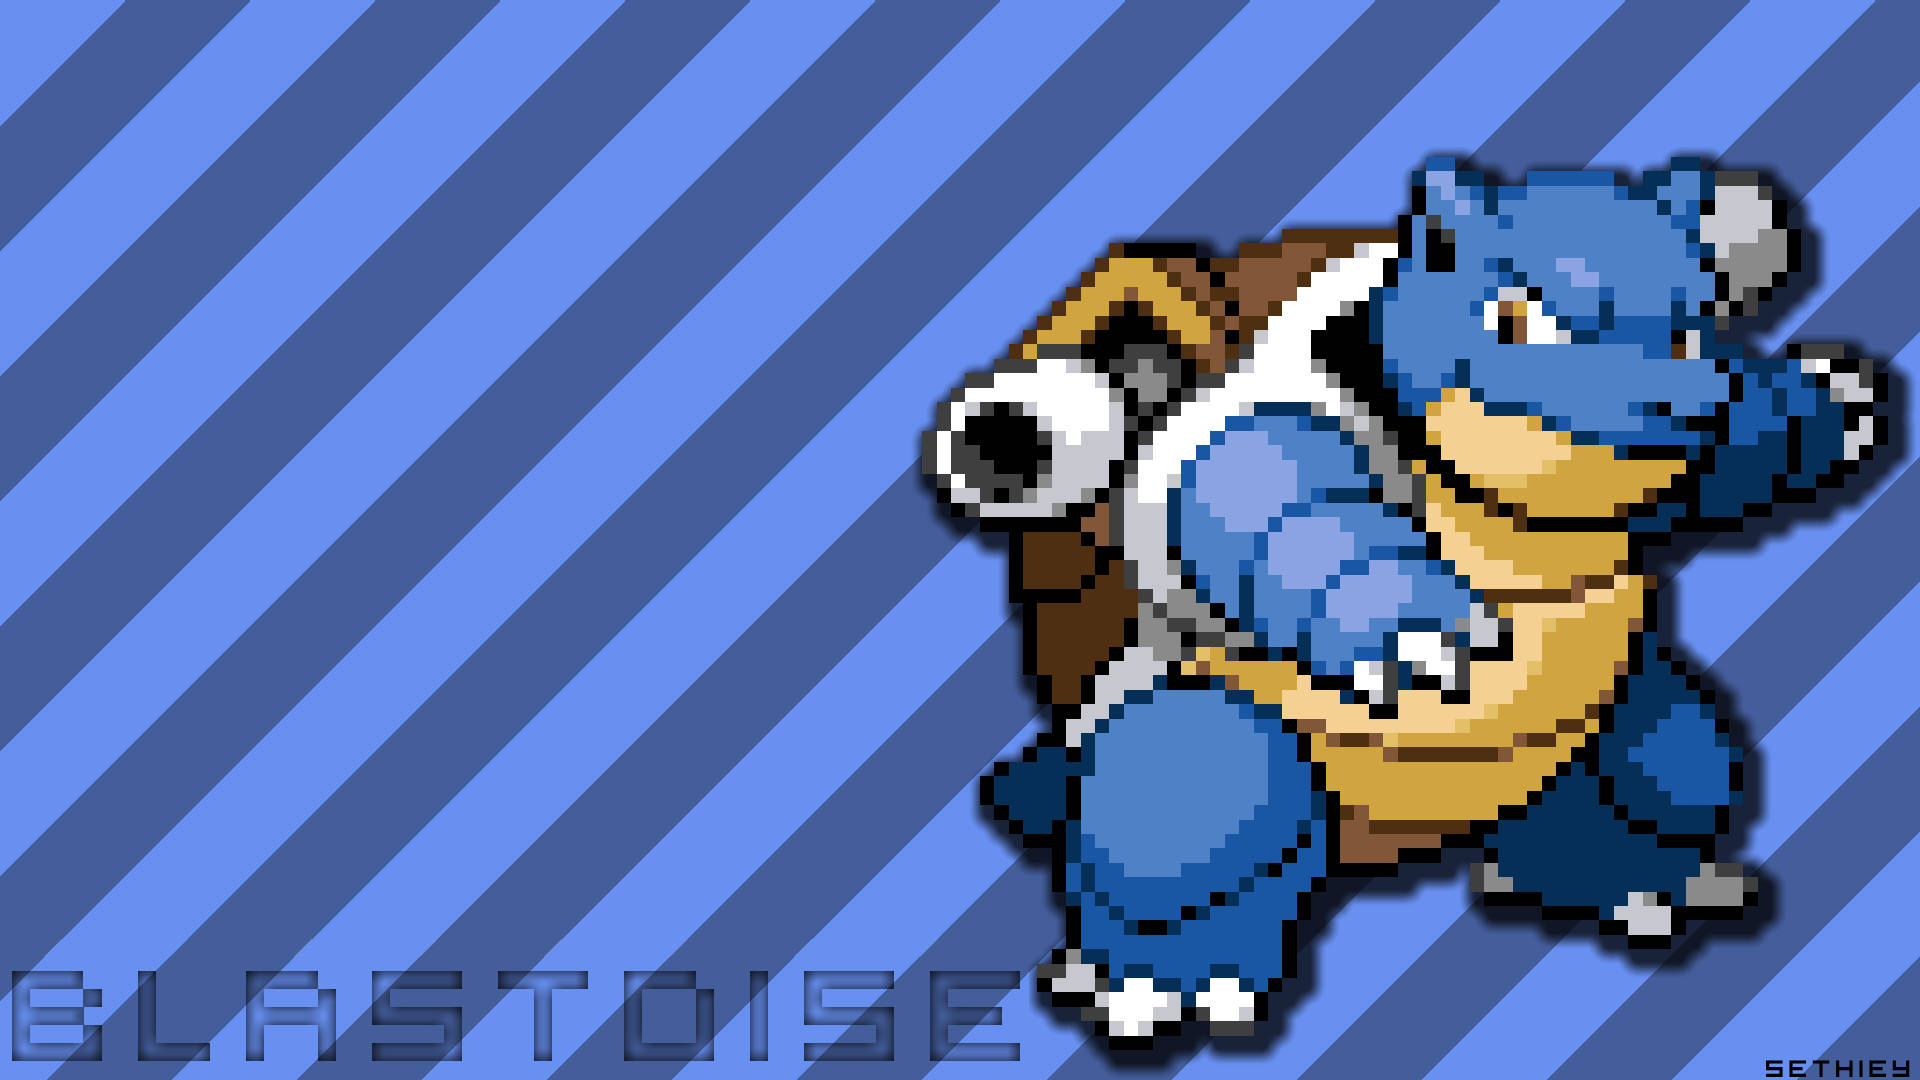 A detailed view of Blastoise, a powerful Pokemon from the Kanto region. Wallpaper